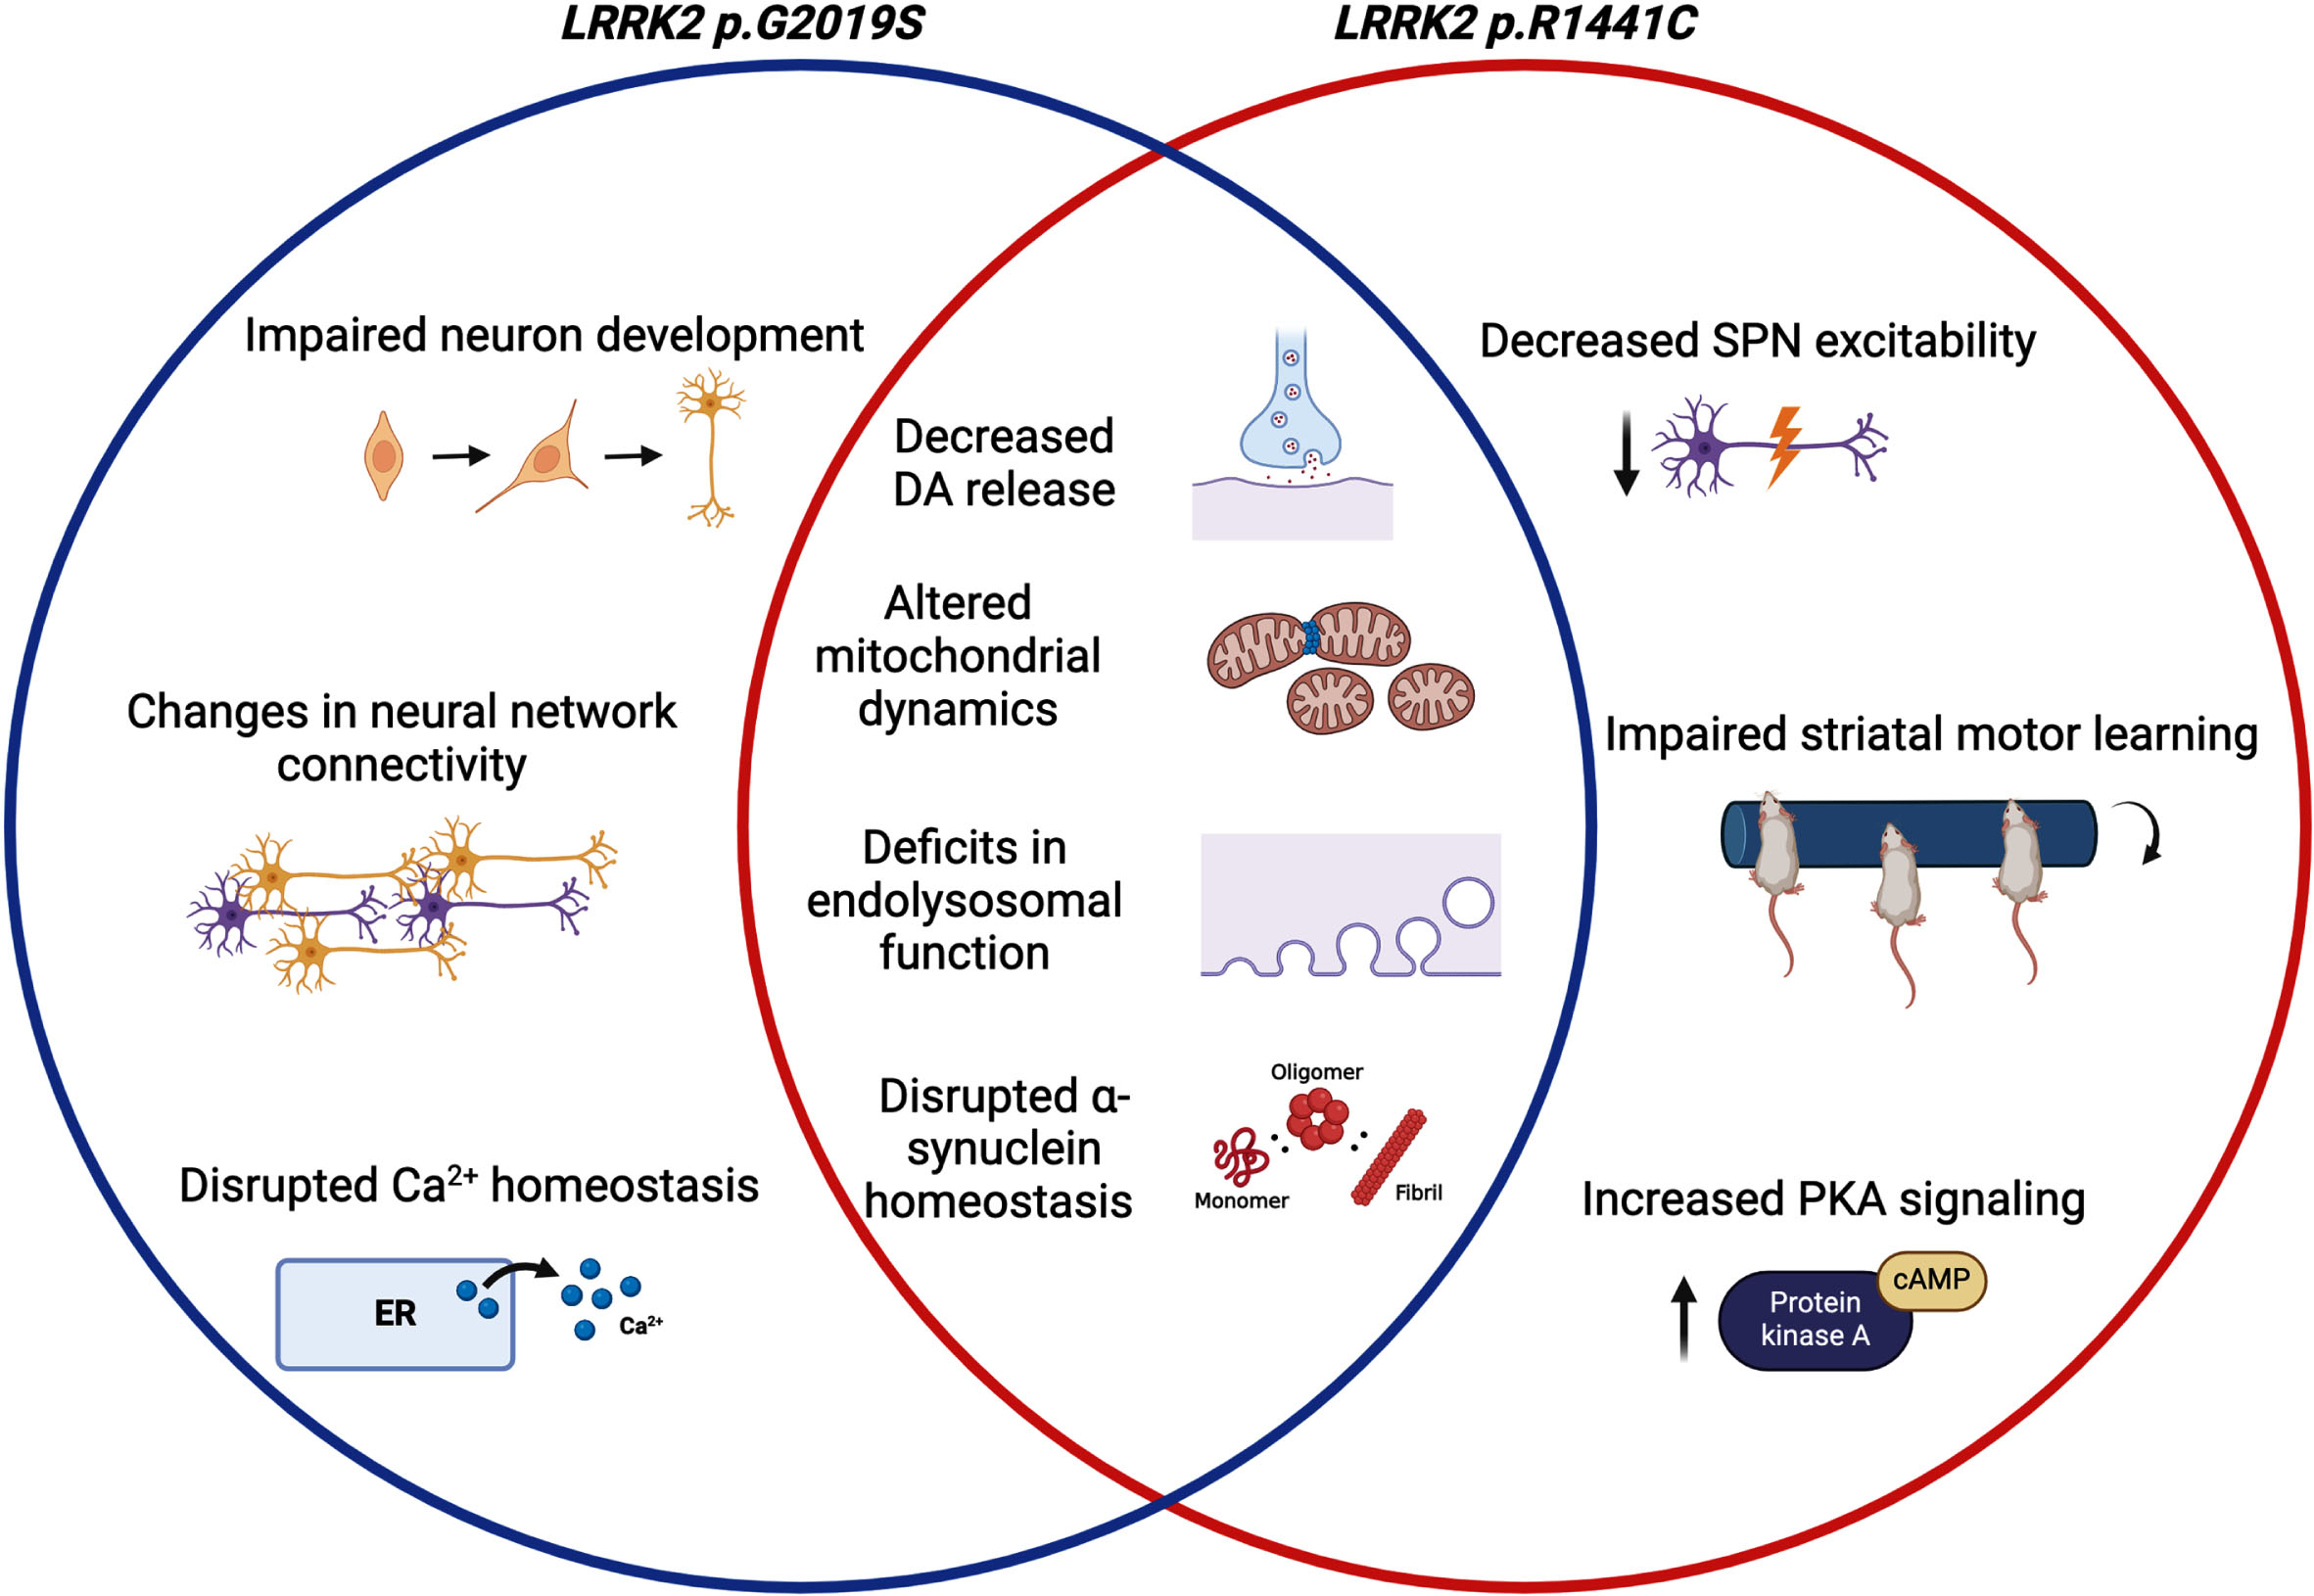 The effects of PD-linked LRRK2 mutations in neurons. The presence of either LRRK2 p.G2019S, or LRRK2 p.R1441C in neurons has been linked to decreased dopamine release, altered mitochondrial dynamics, deficits in endolysosomal function and trafficking, and disrupted α-synuclein homeostasis. LRRK2 p.R1441C, but not LRRK2 p.G2019S, in neurons has been linked to decreased spiny projection neuron excitability, impaired motor learning, and increased PKA signaling. LRRK2 p.G2019S in neurons has been linked to impaired neuron development, changes in neural networks connectivity, and calcium homeostasis, but this has yet to be explored in LRRK2 p.R1441C neurons. Created with biorender.com [66].